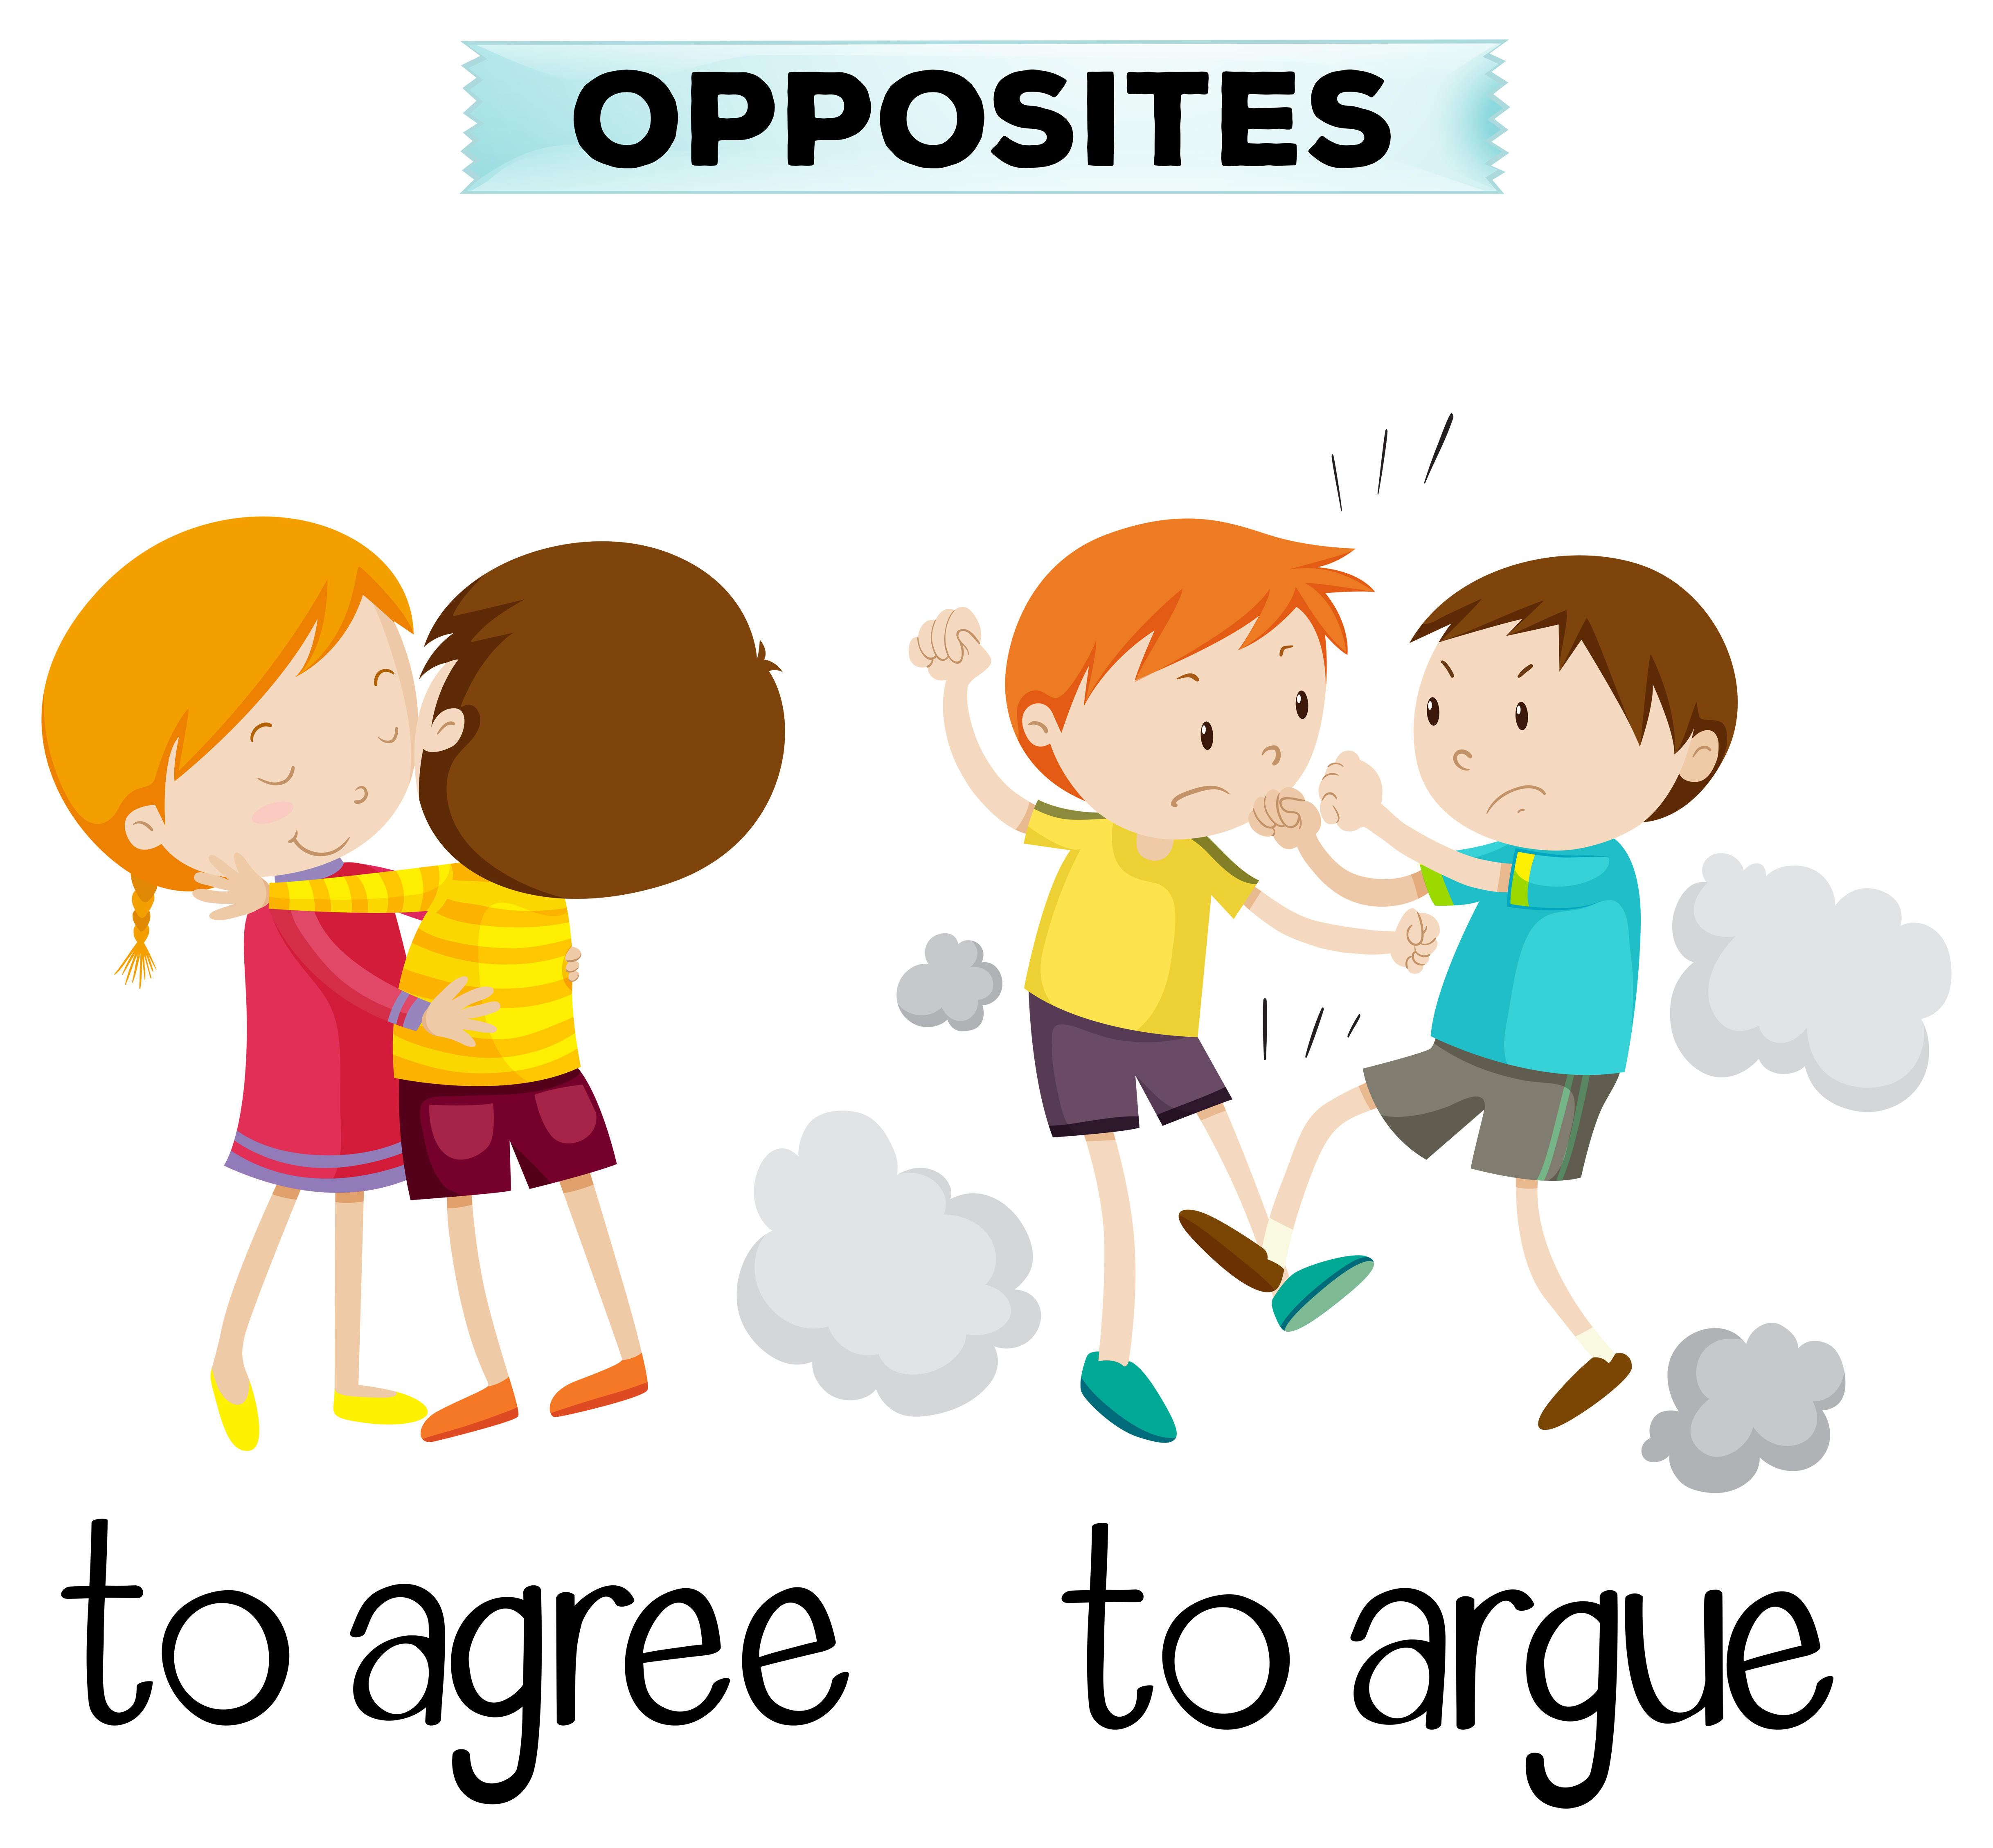 Download the Opposite words for agree and argue 303623